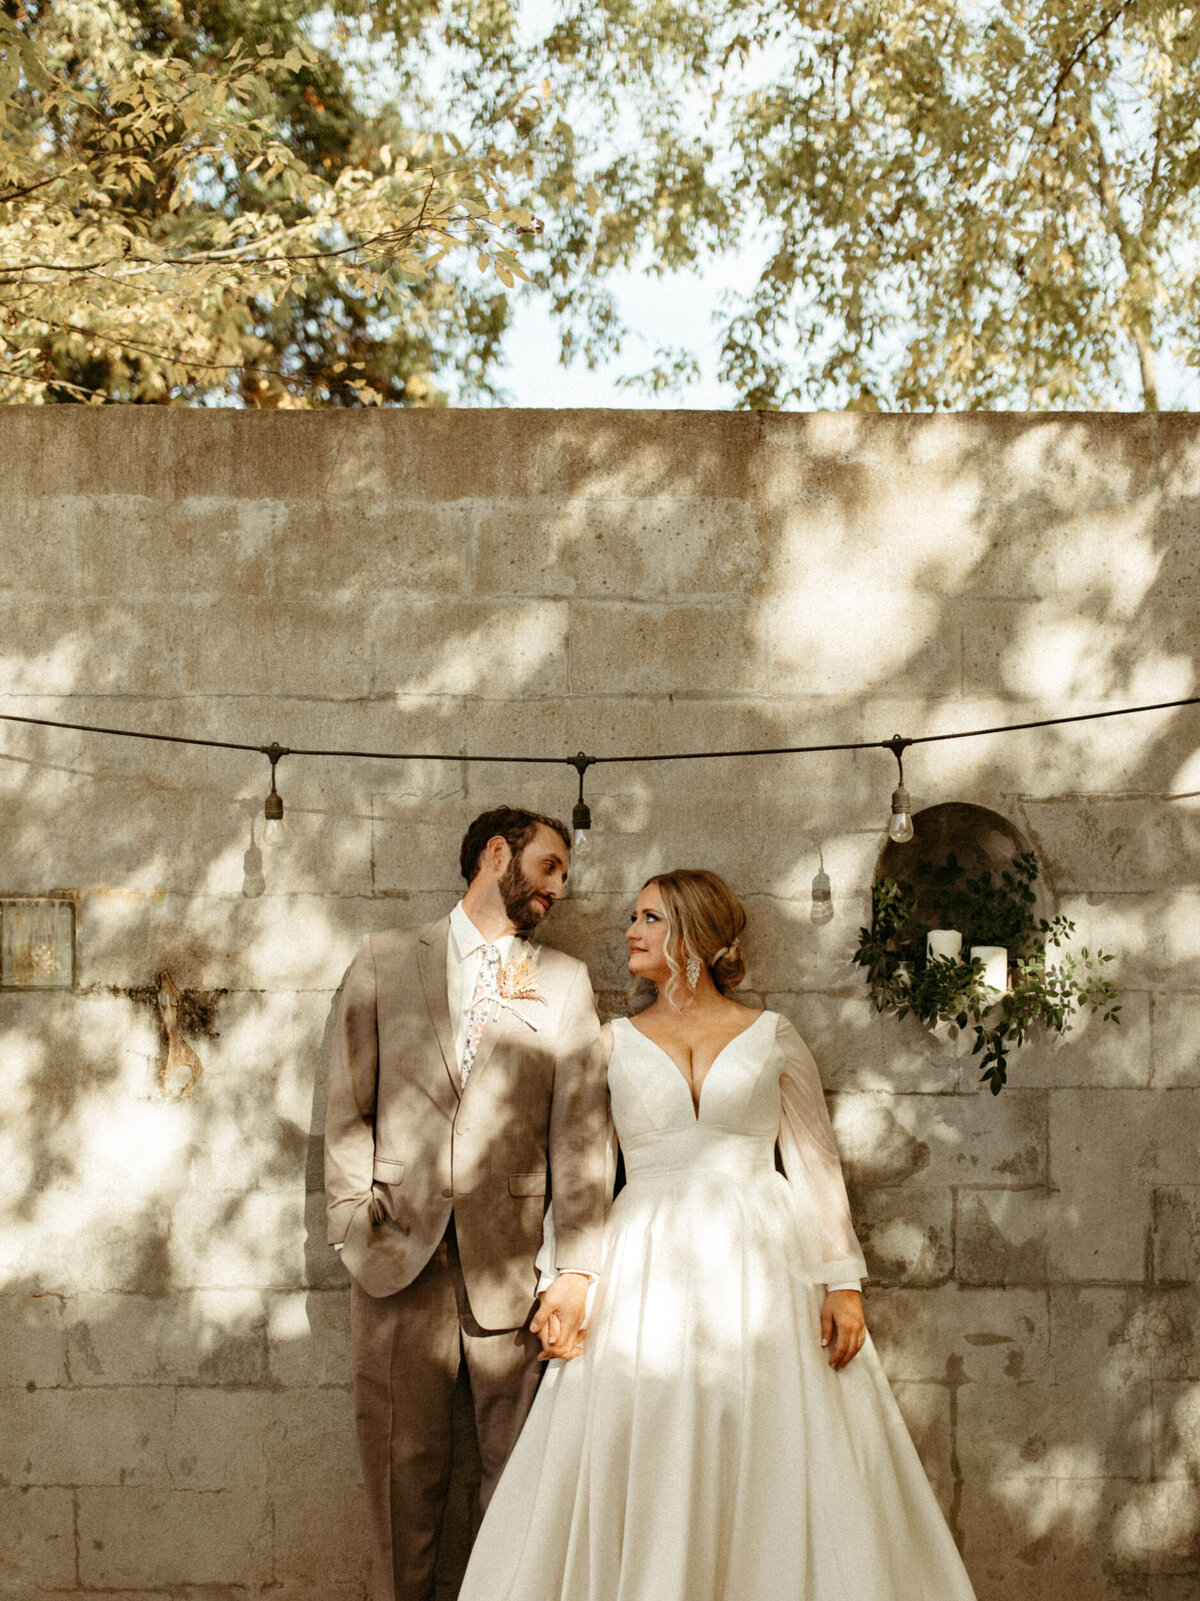 Bride and groom in wedding attire standing side by side leaning against wall with string lights hanging over them